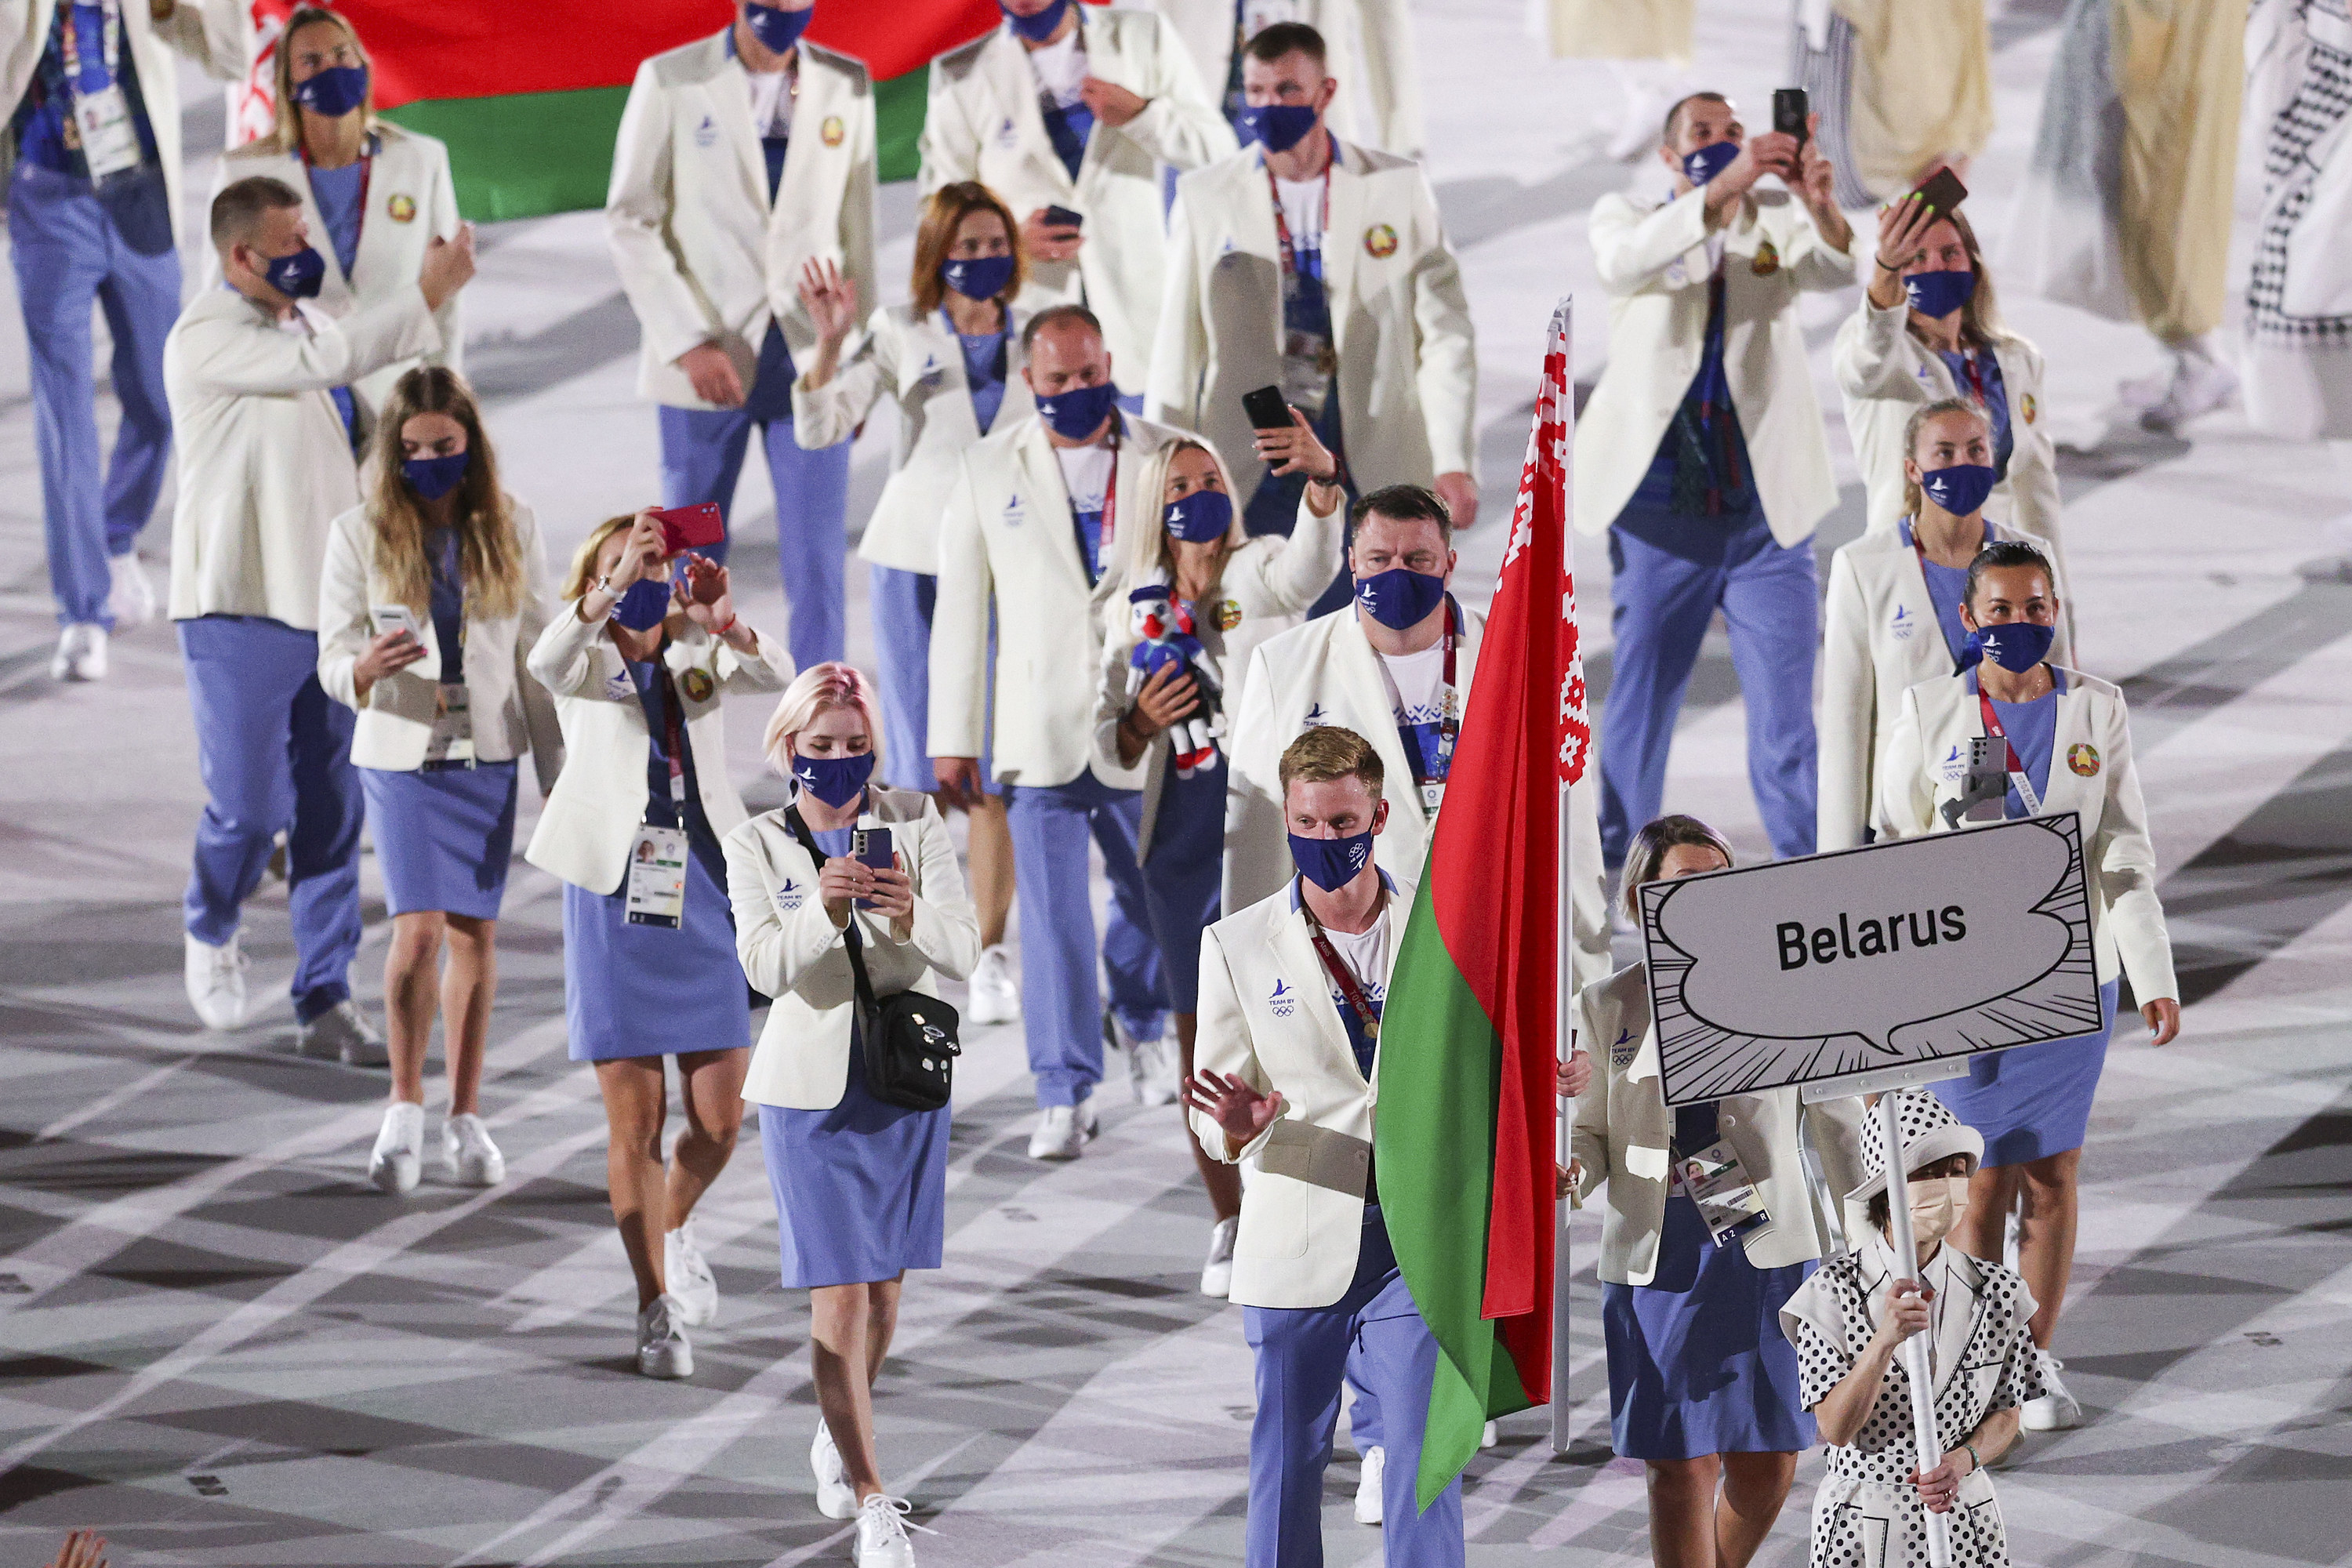 The athletes wore light blazers and pastes pants or skirts with sneakers